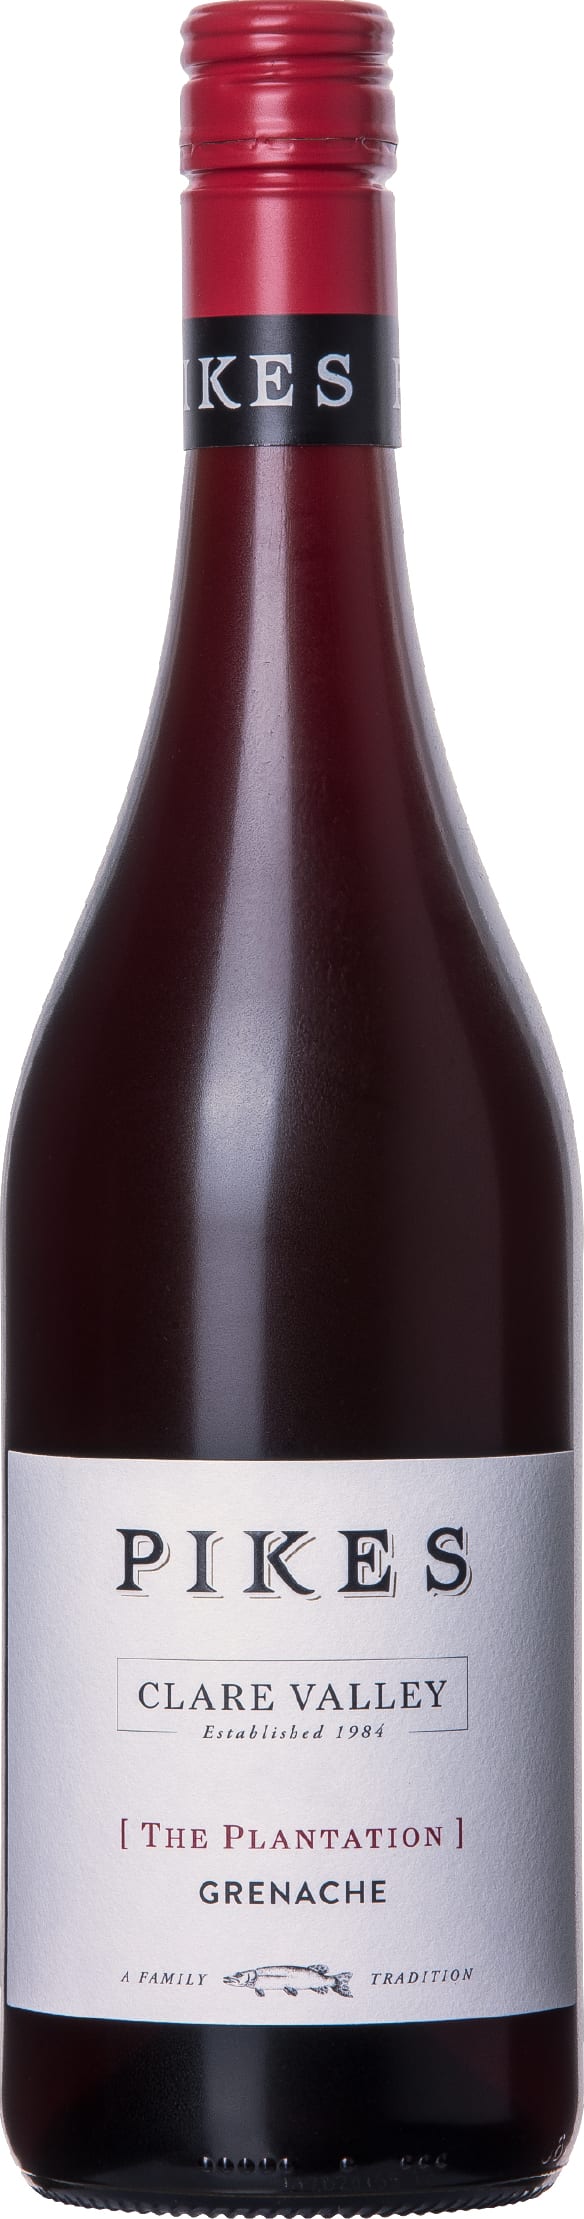 Pikes The Plantation Grenache 2019 75cl - Buy Pikes Wines from GREAT WINES DIRECT wine shop